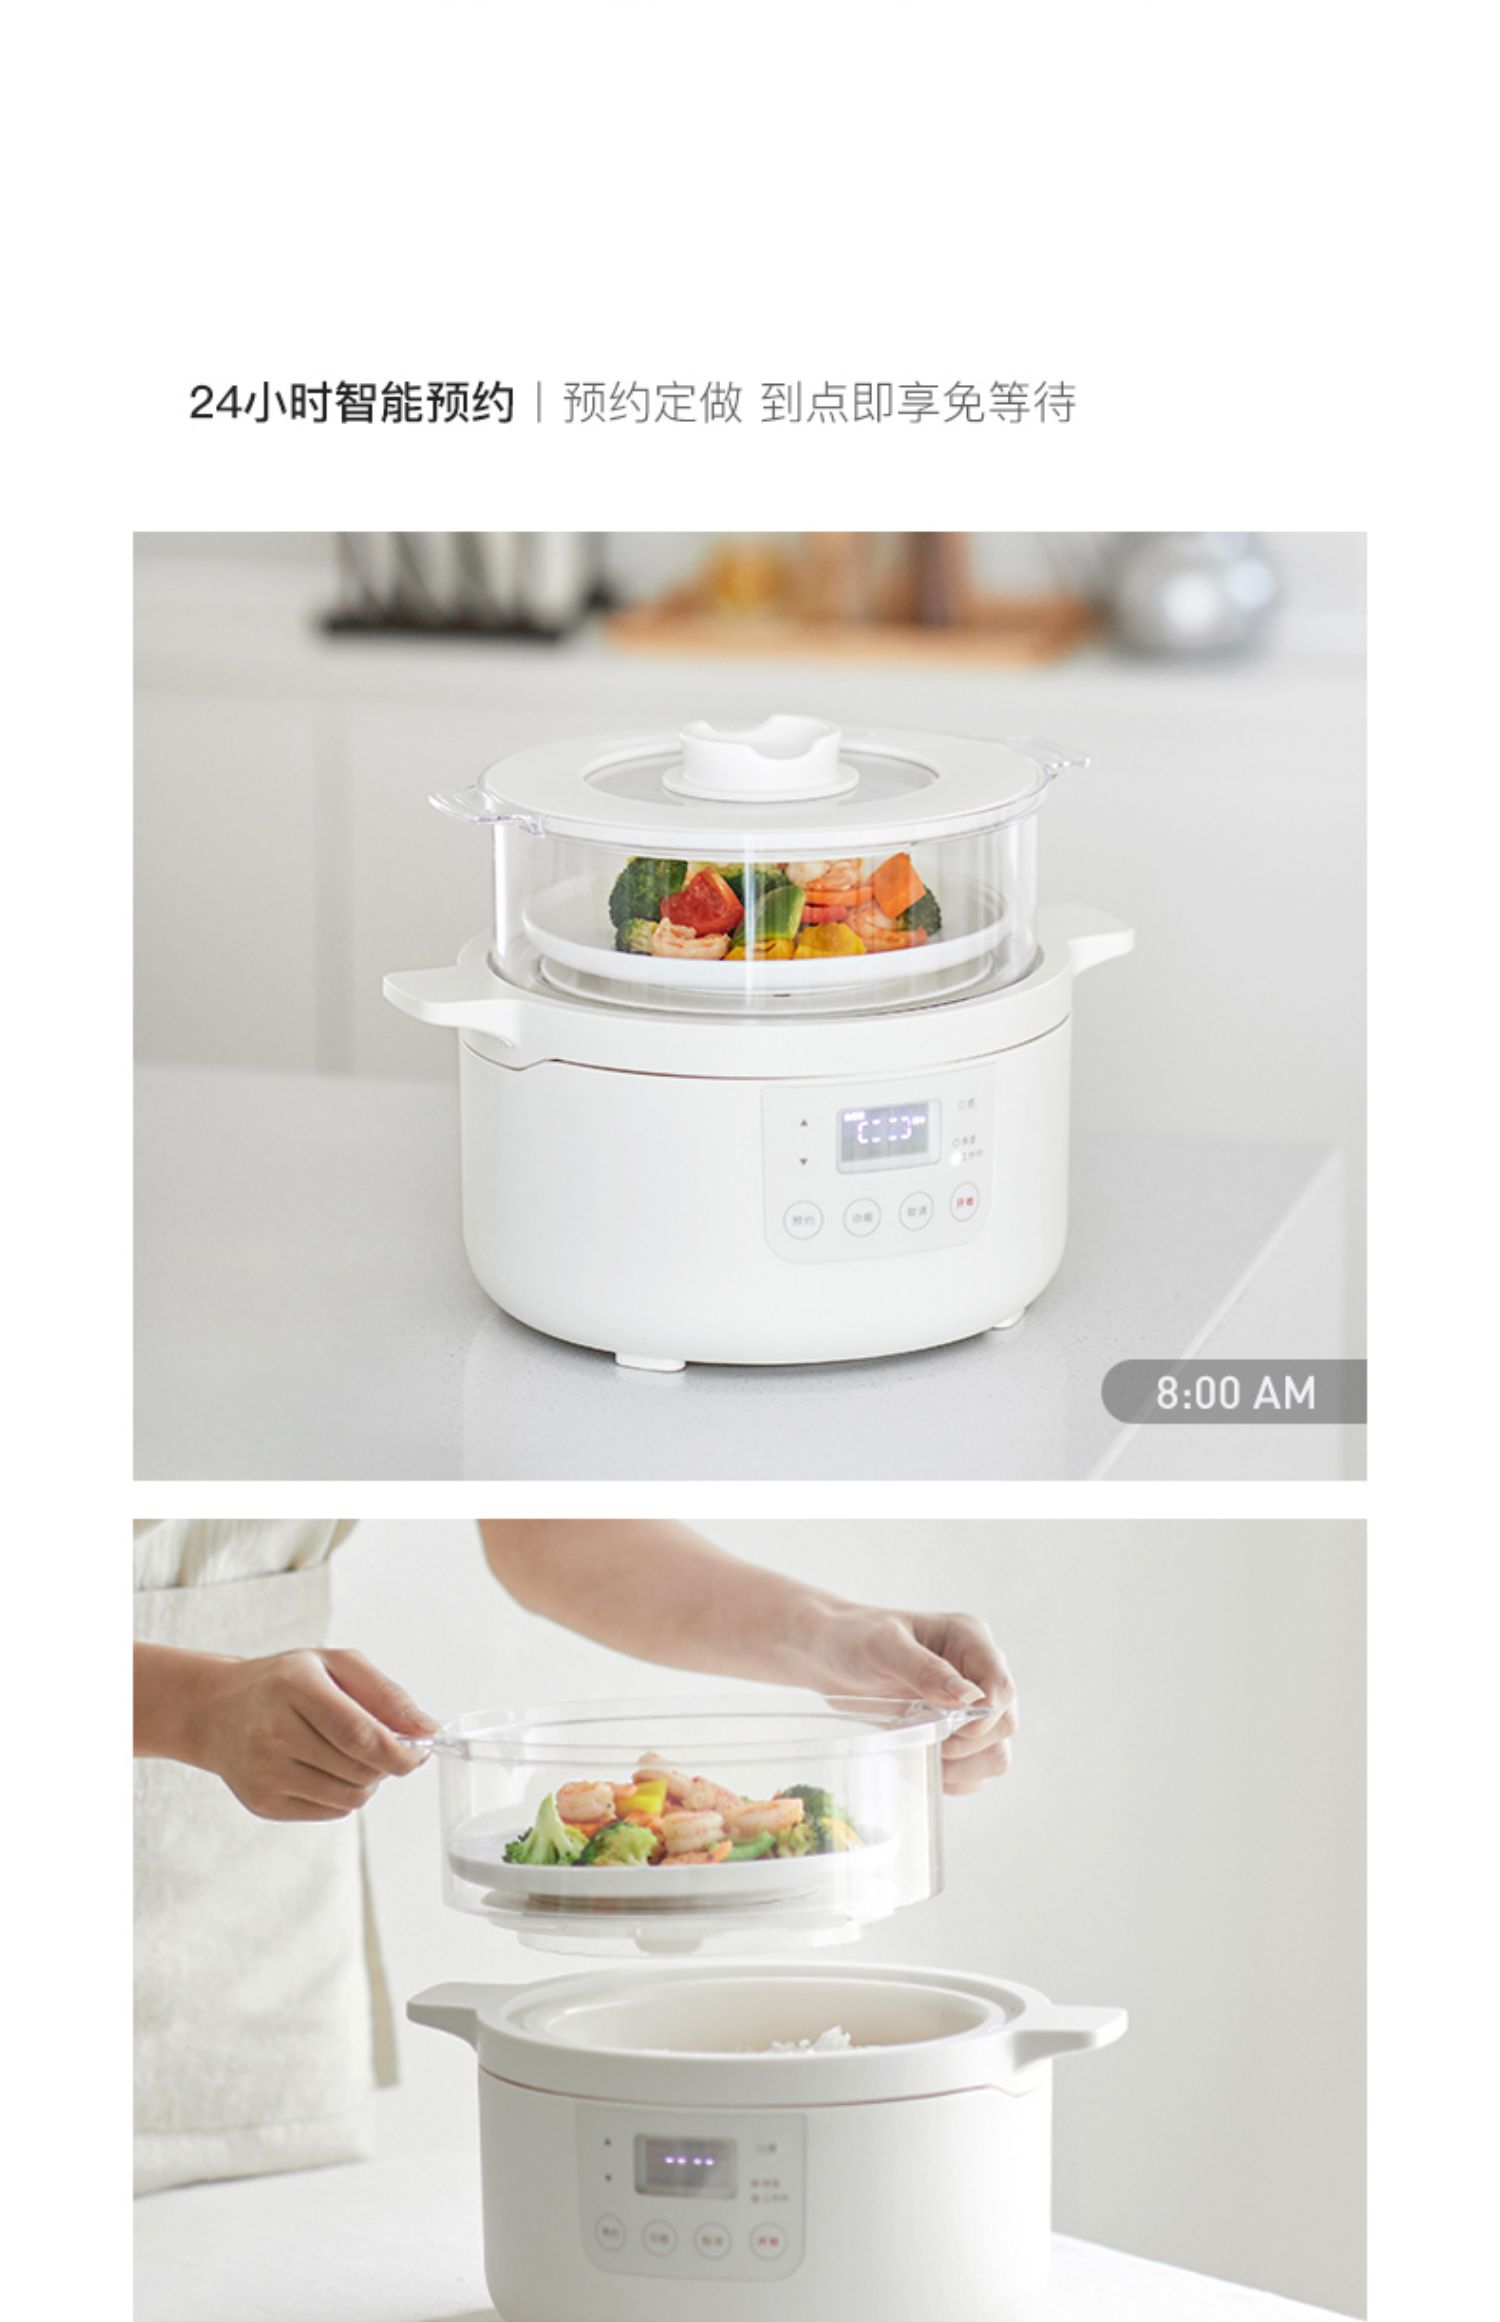 Midea Rice Cooker Multifunctional Home Electric Rice Cooker Digital Display  24h Appointment 0.8l Capacity Kitchen Appliances - Rice Cookers - AliExpress